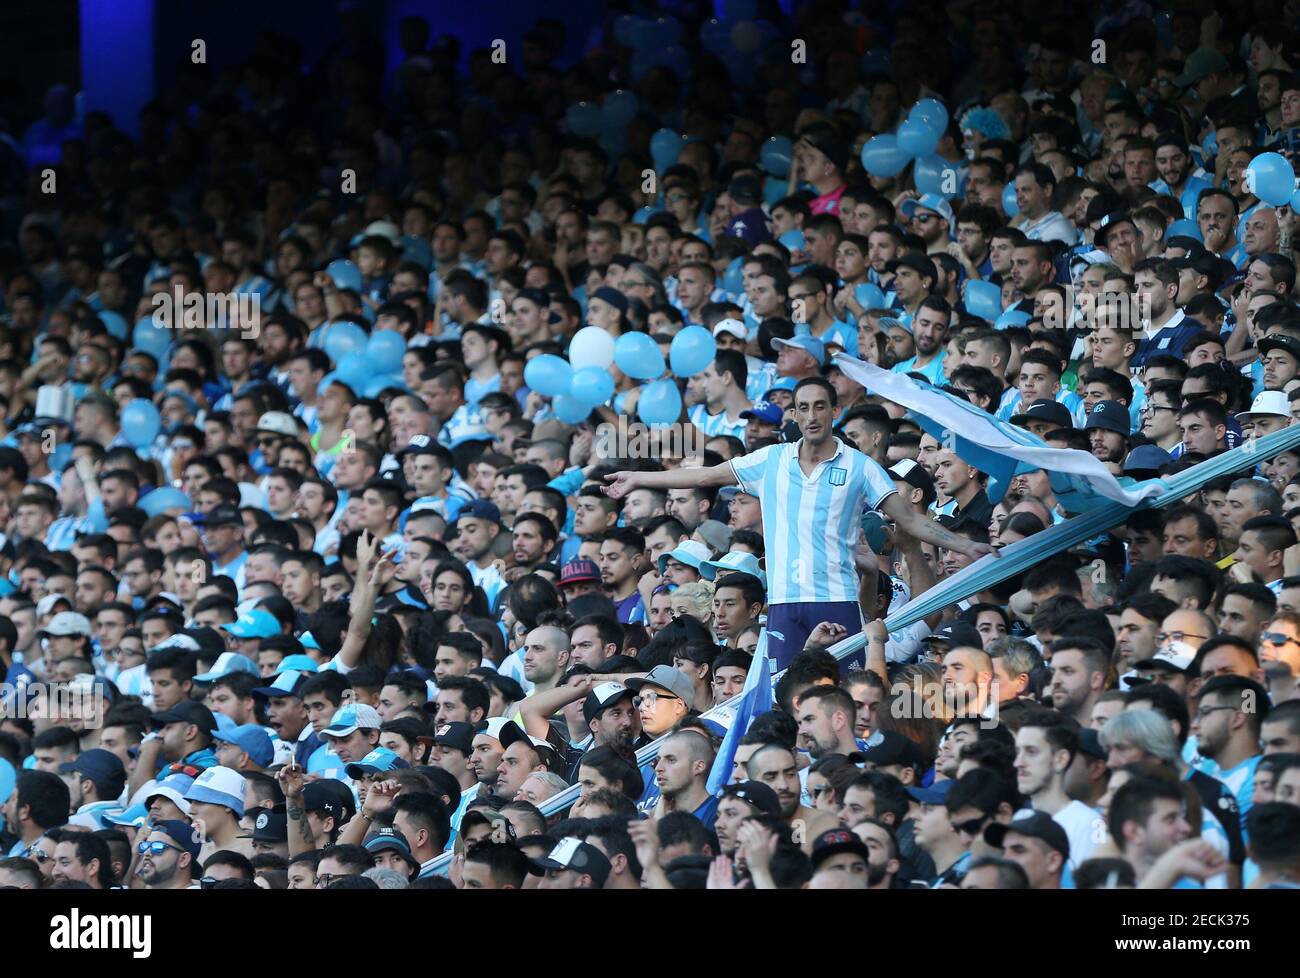 Soccer Argentina Championship Racing Club V Defensa Y Justicia Presidente Peron Stadium Buenos Aires Argentina April 7 19 Racing Club Fans Before The Match Reuters Agustin Marcarian Stock Photo Alamy